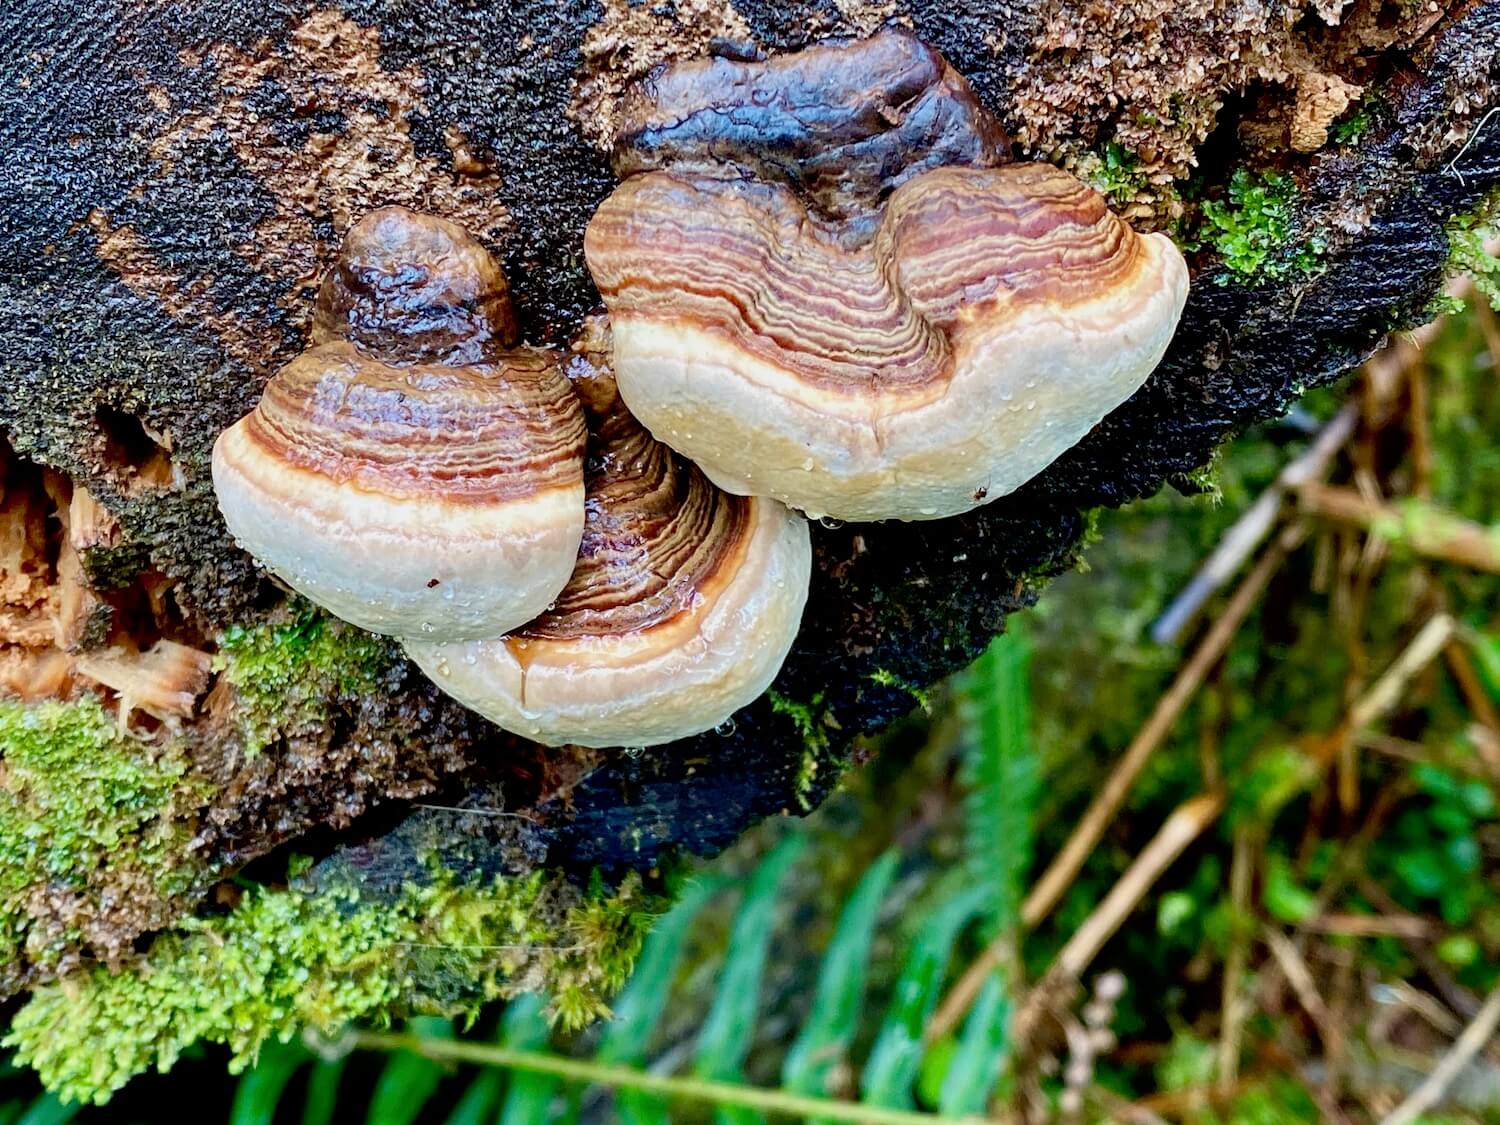 Mushrooms bloom on a dead piece of timber propped up against a tree stump on the forest floor. Fern fronds and other lime green mosses creep into the photo.